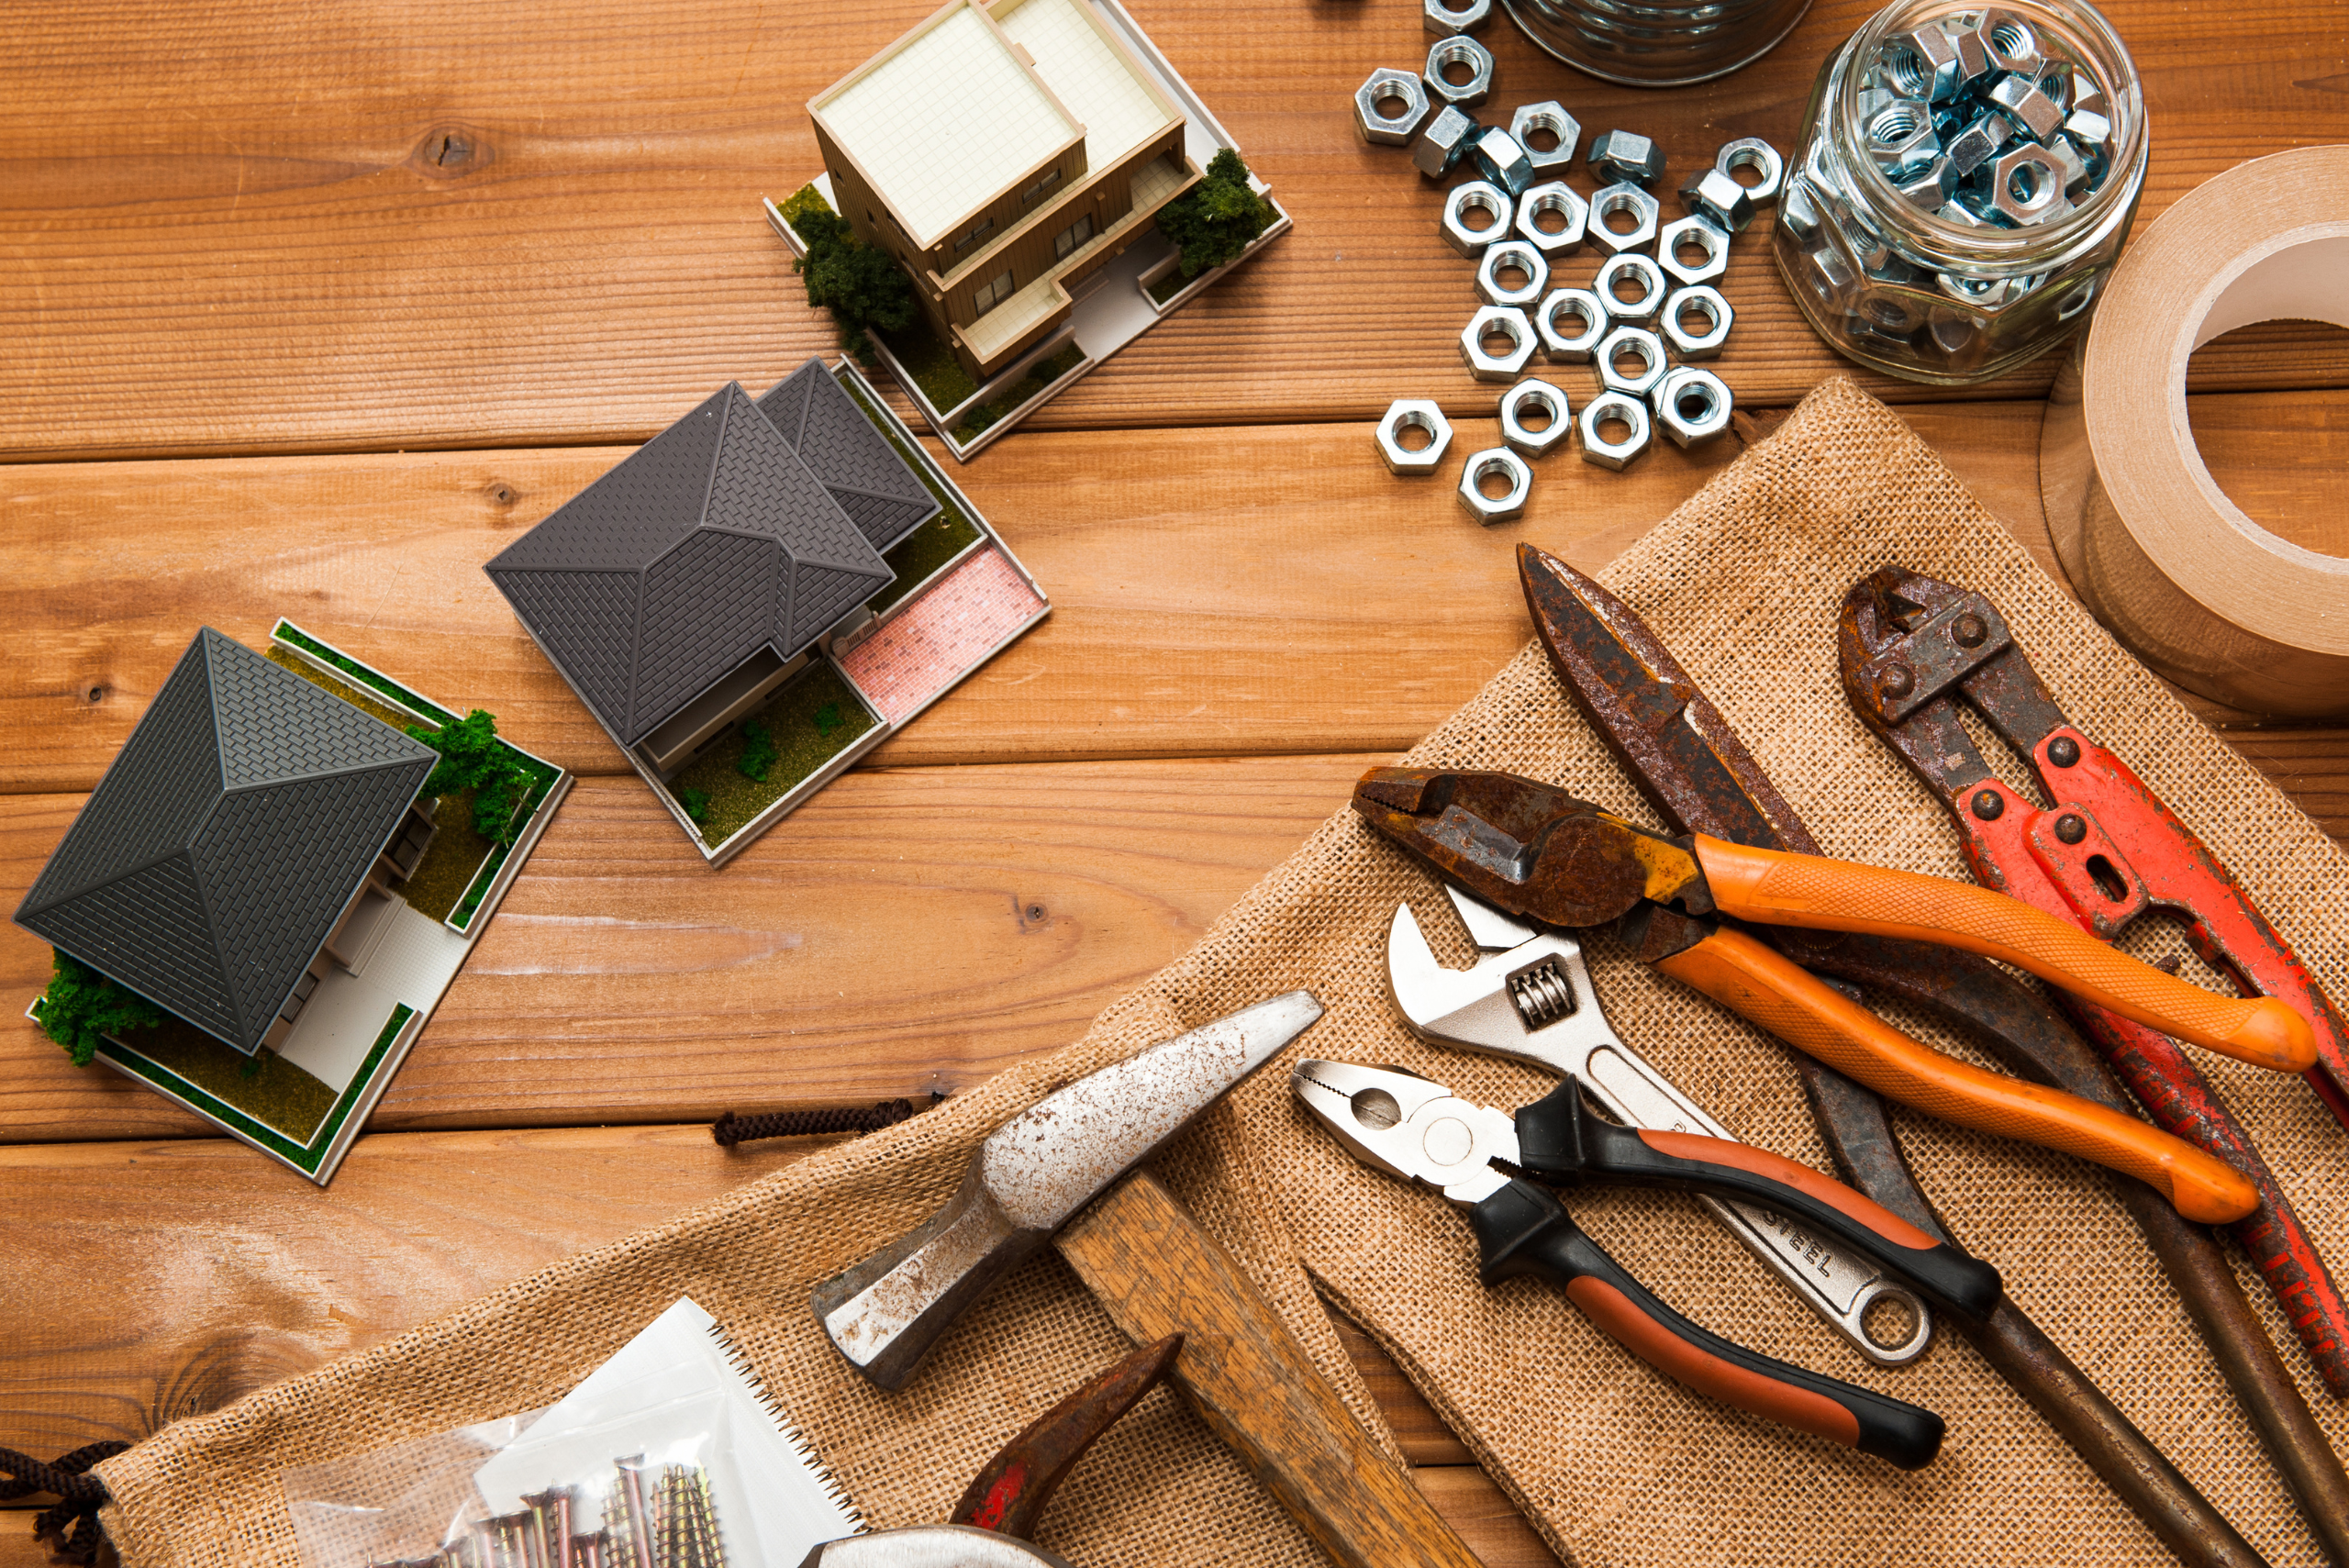 An assortment of tools on a wooden background.